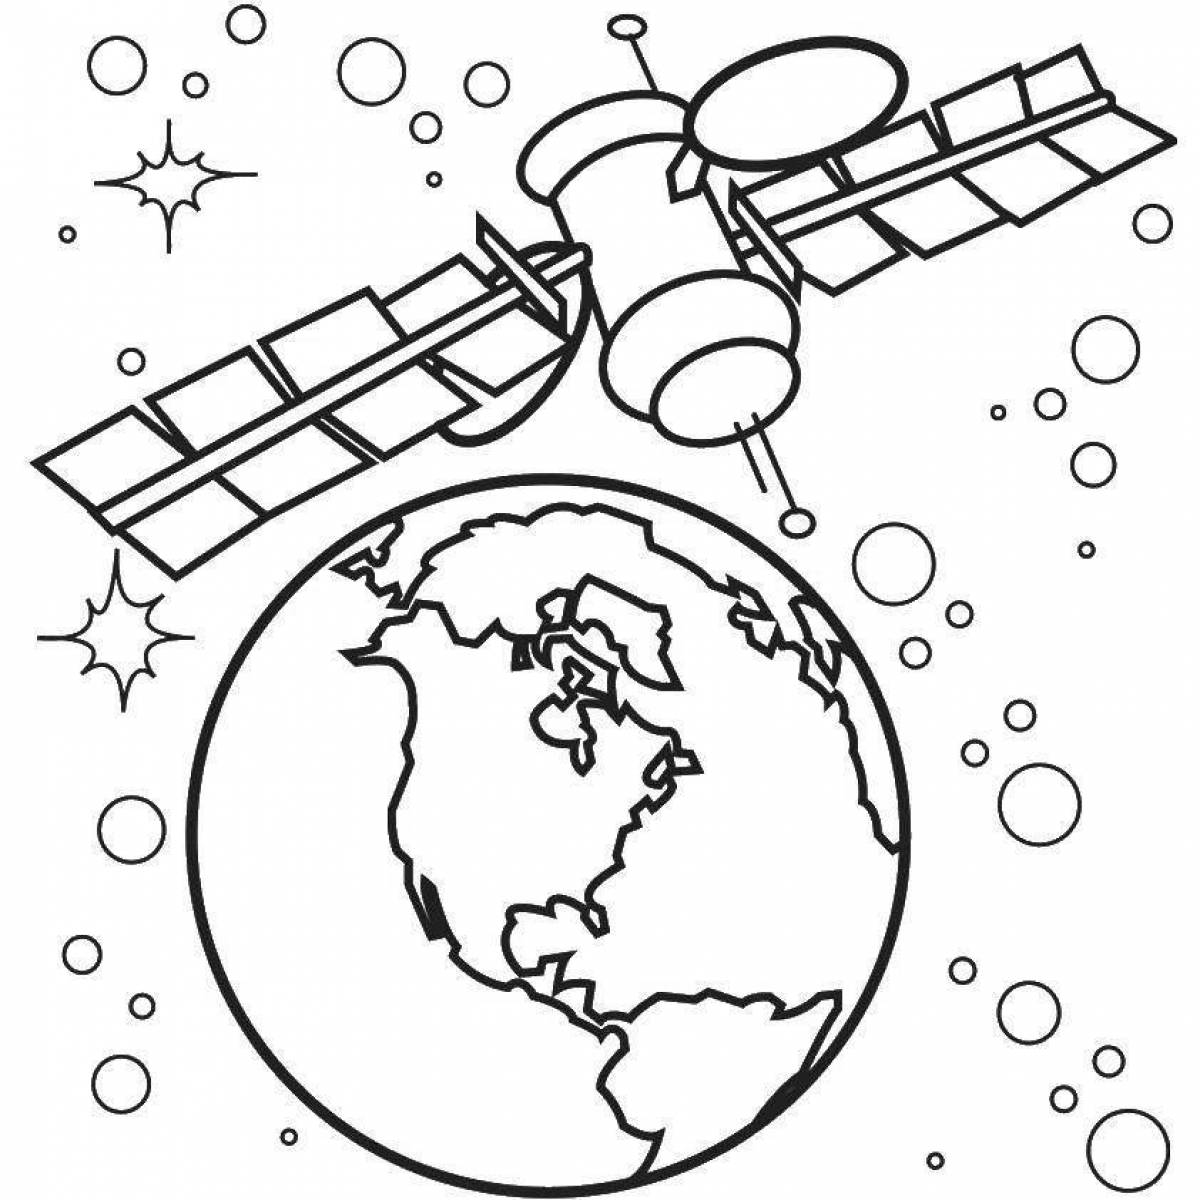 Great satellite coloring page